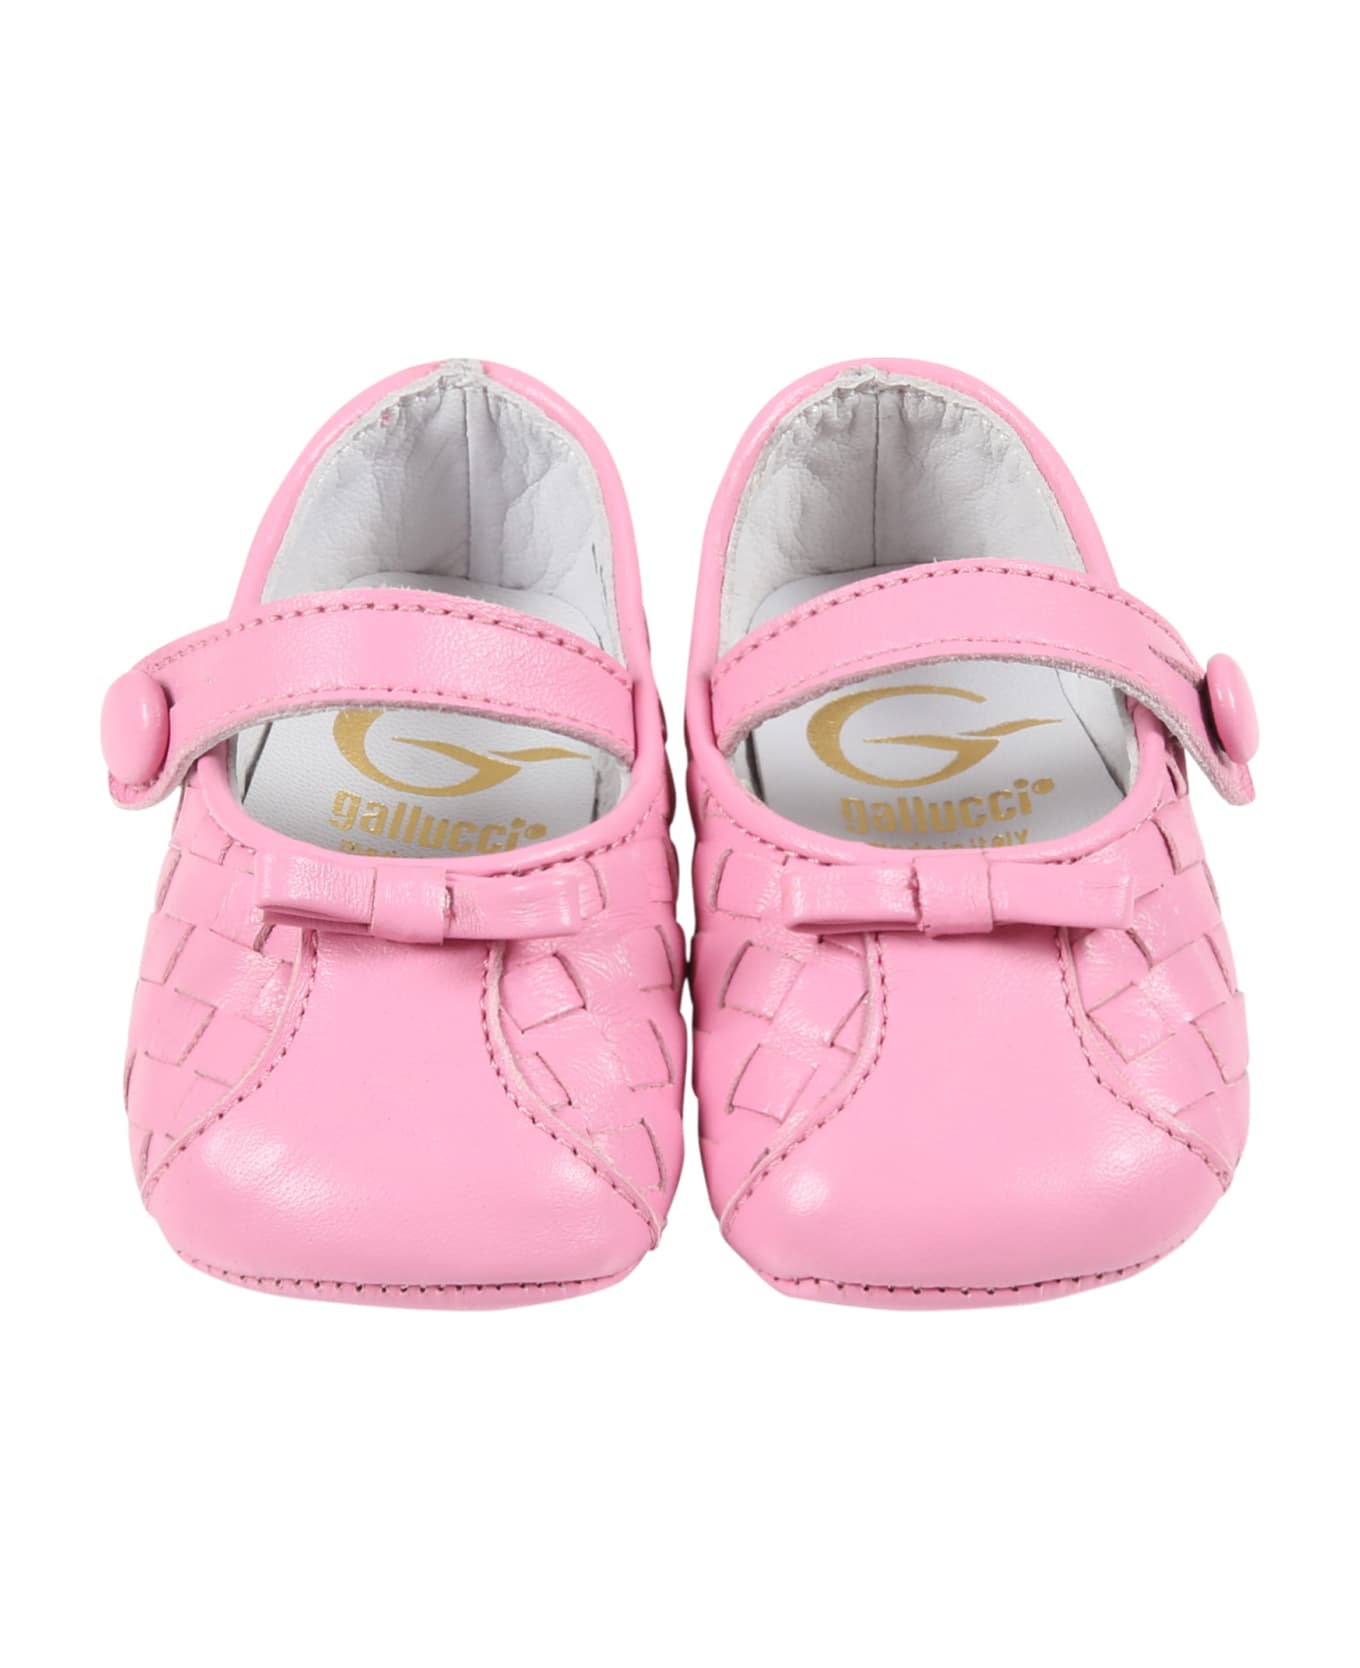 Gallucci Pink Ballet Flats For Baby Girl - Pink